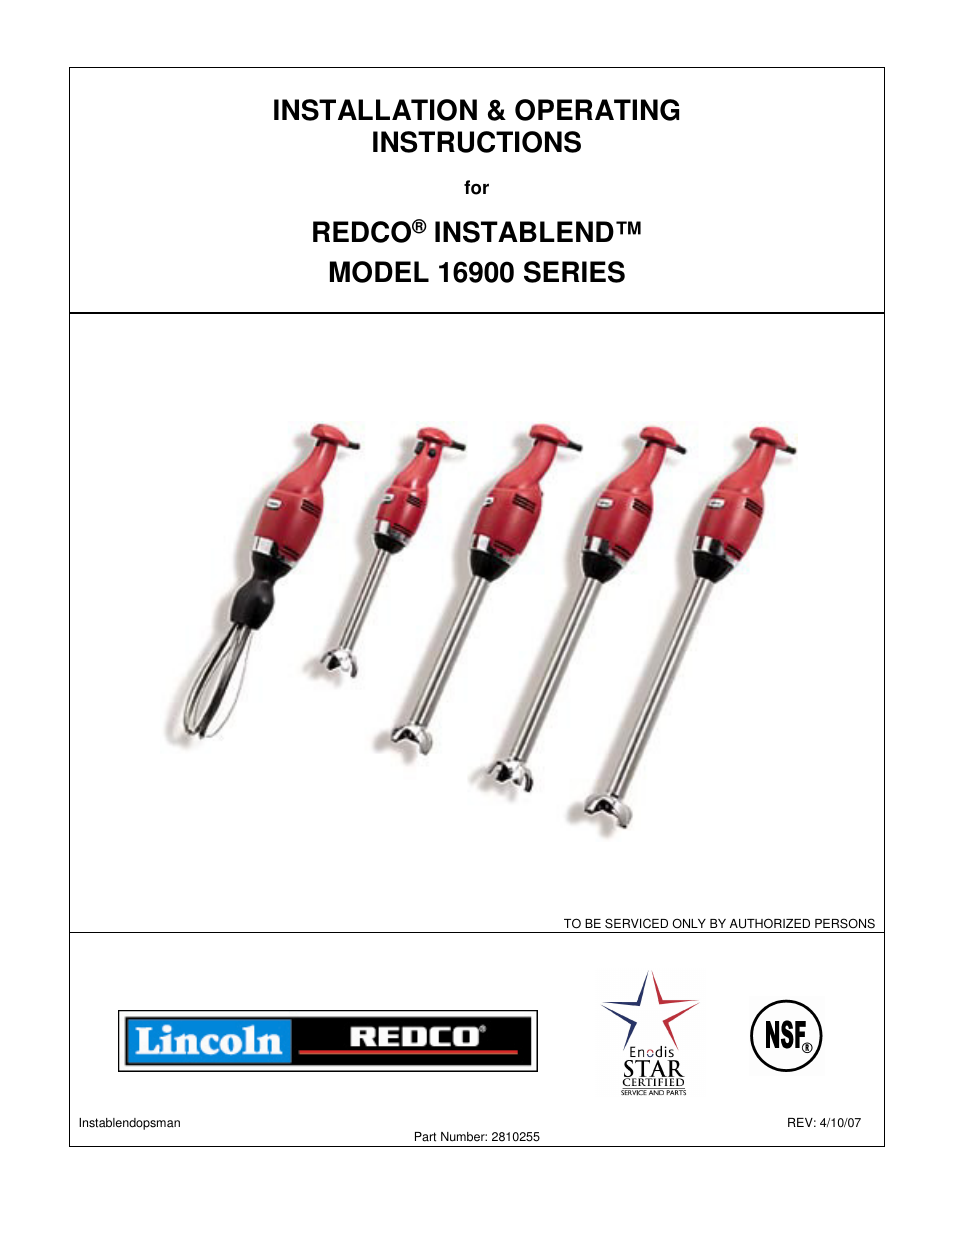 Lincoln REDCO INSTABLEND 16900 User Manual | 16 pages